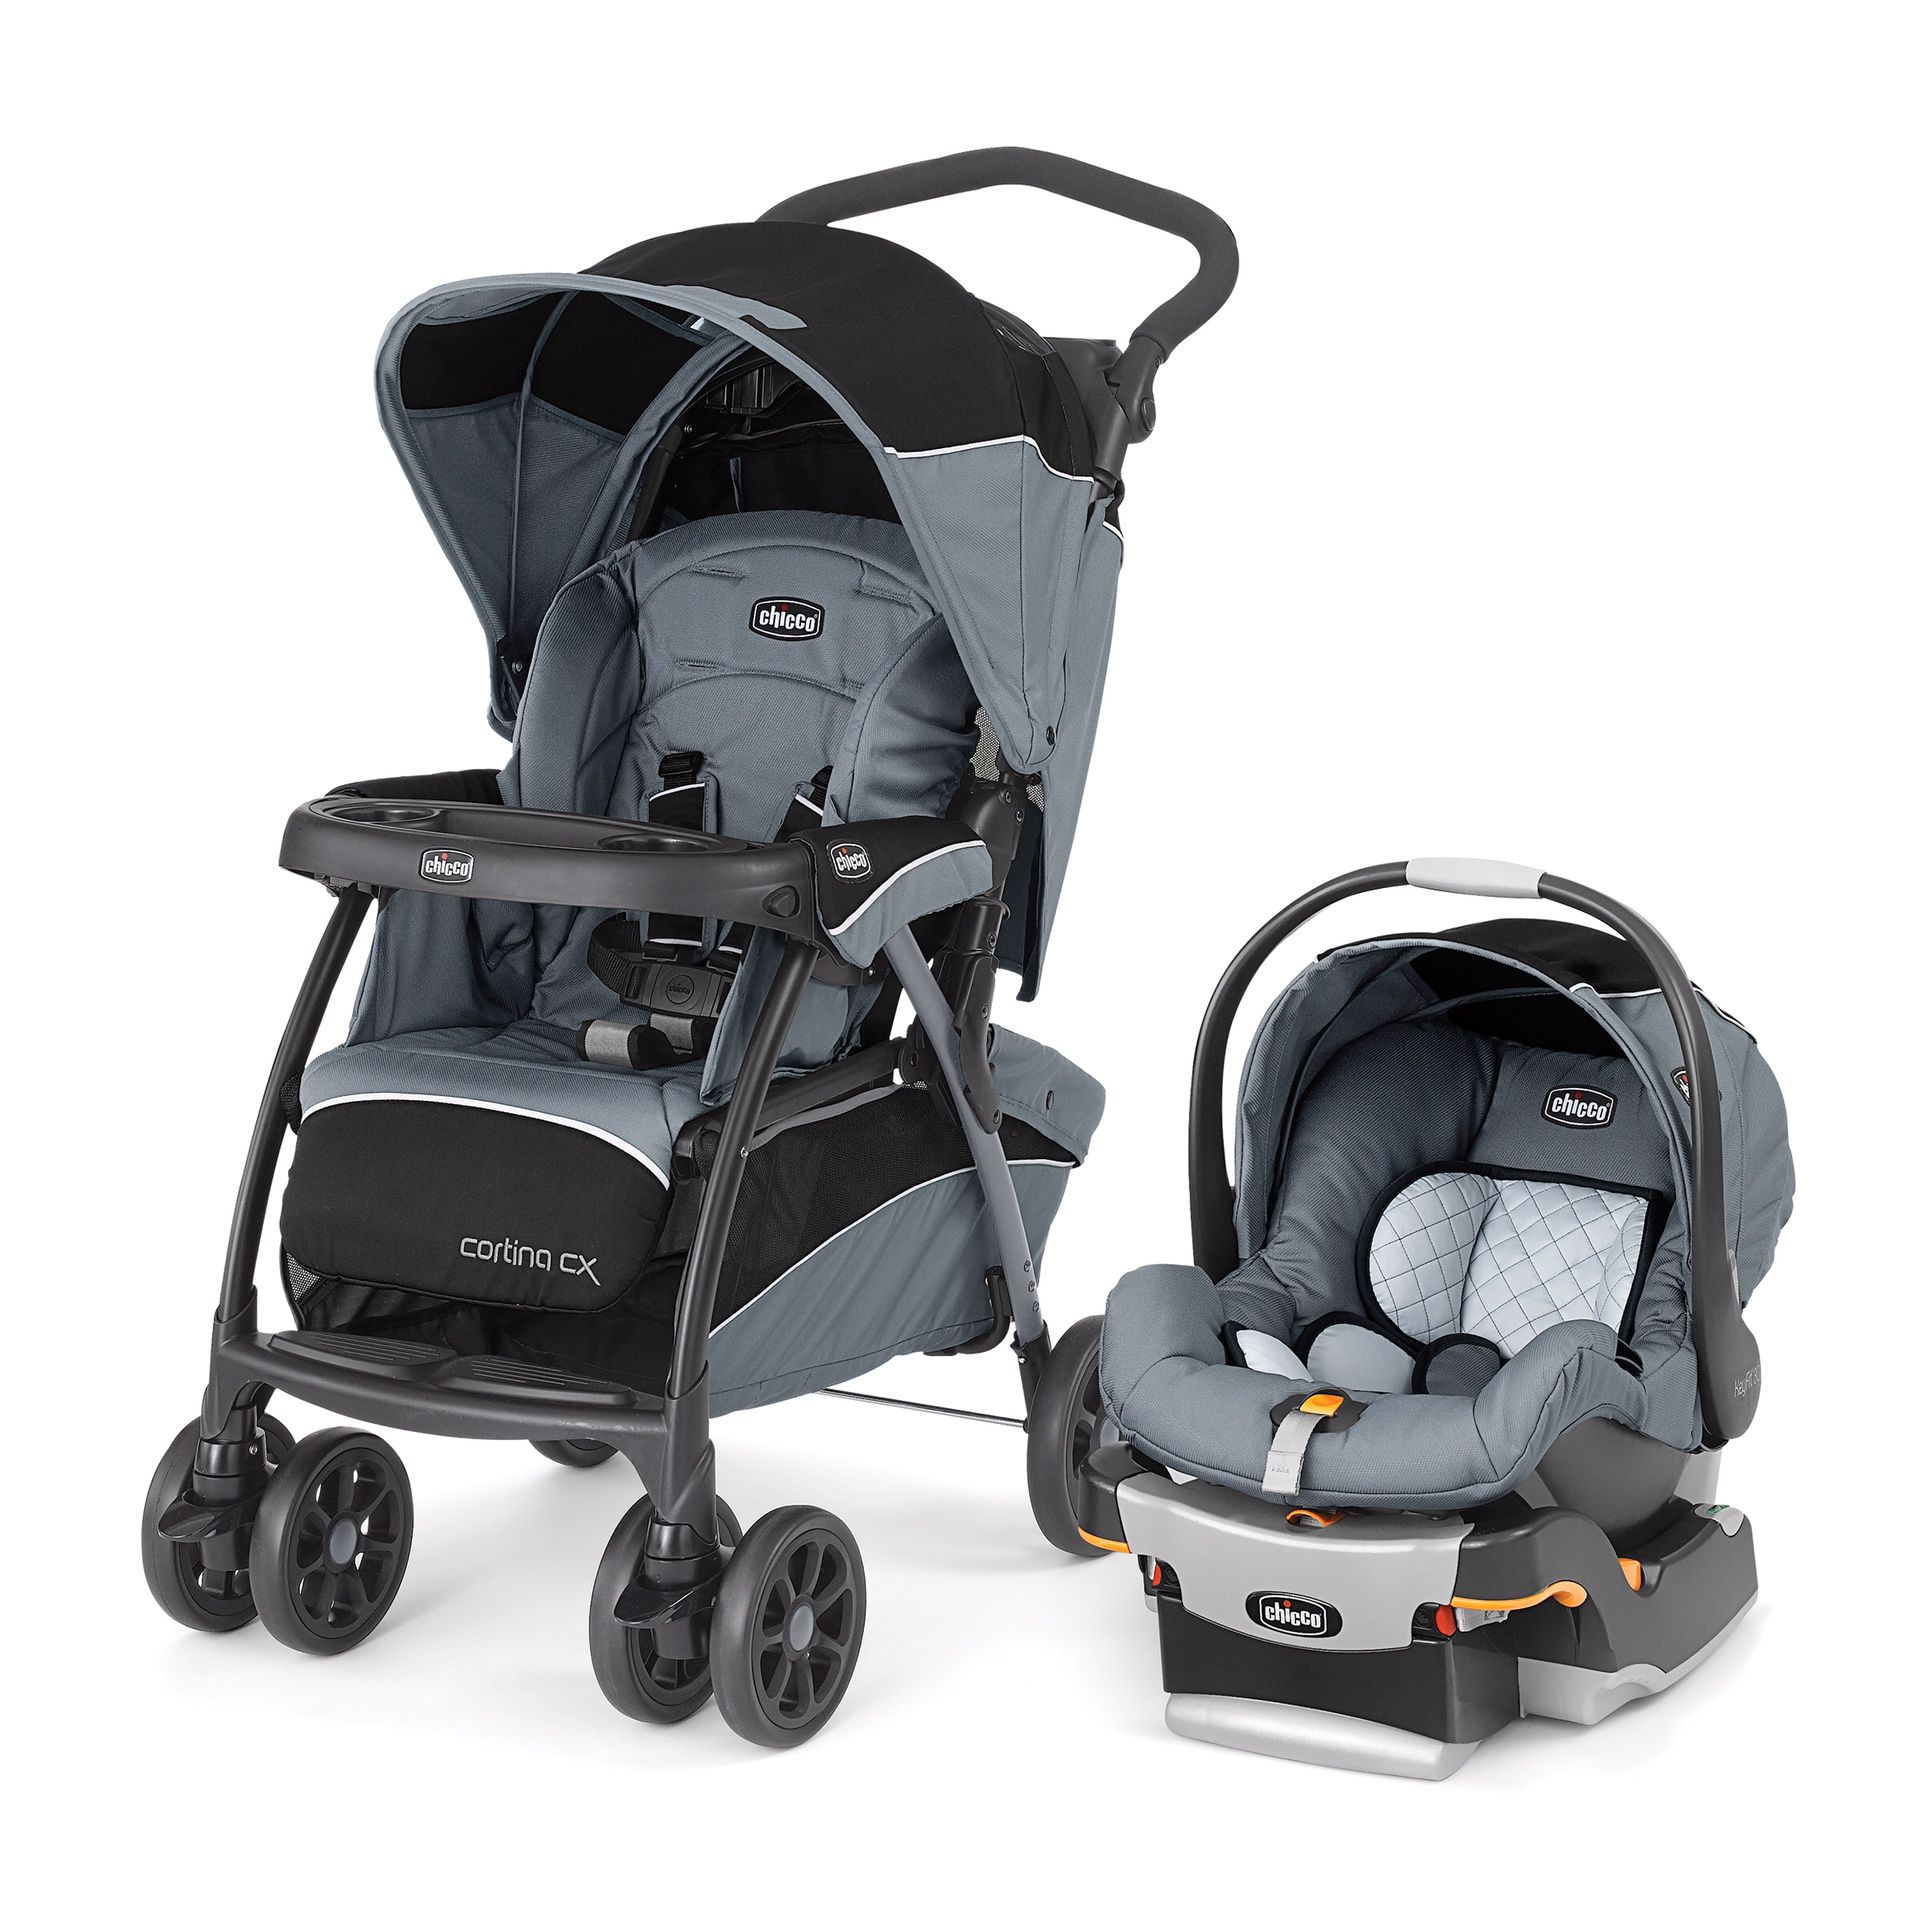 Chicco Cortina CX Travel System Stroller, Iron With car seat